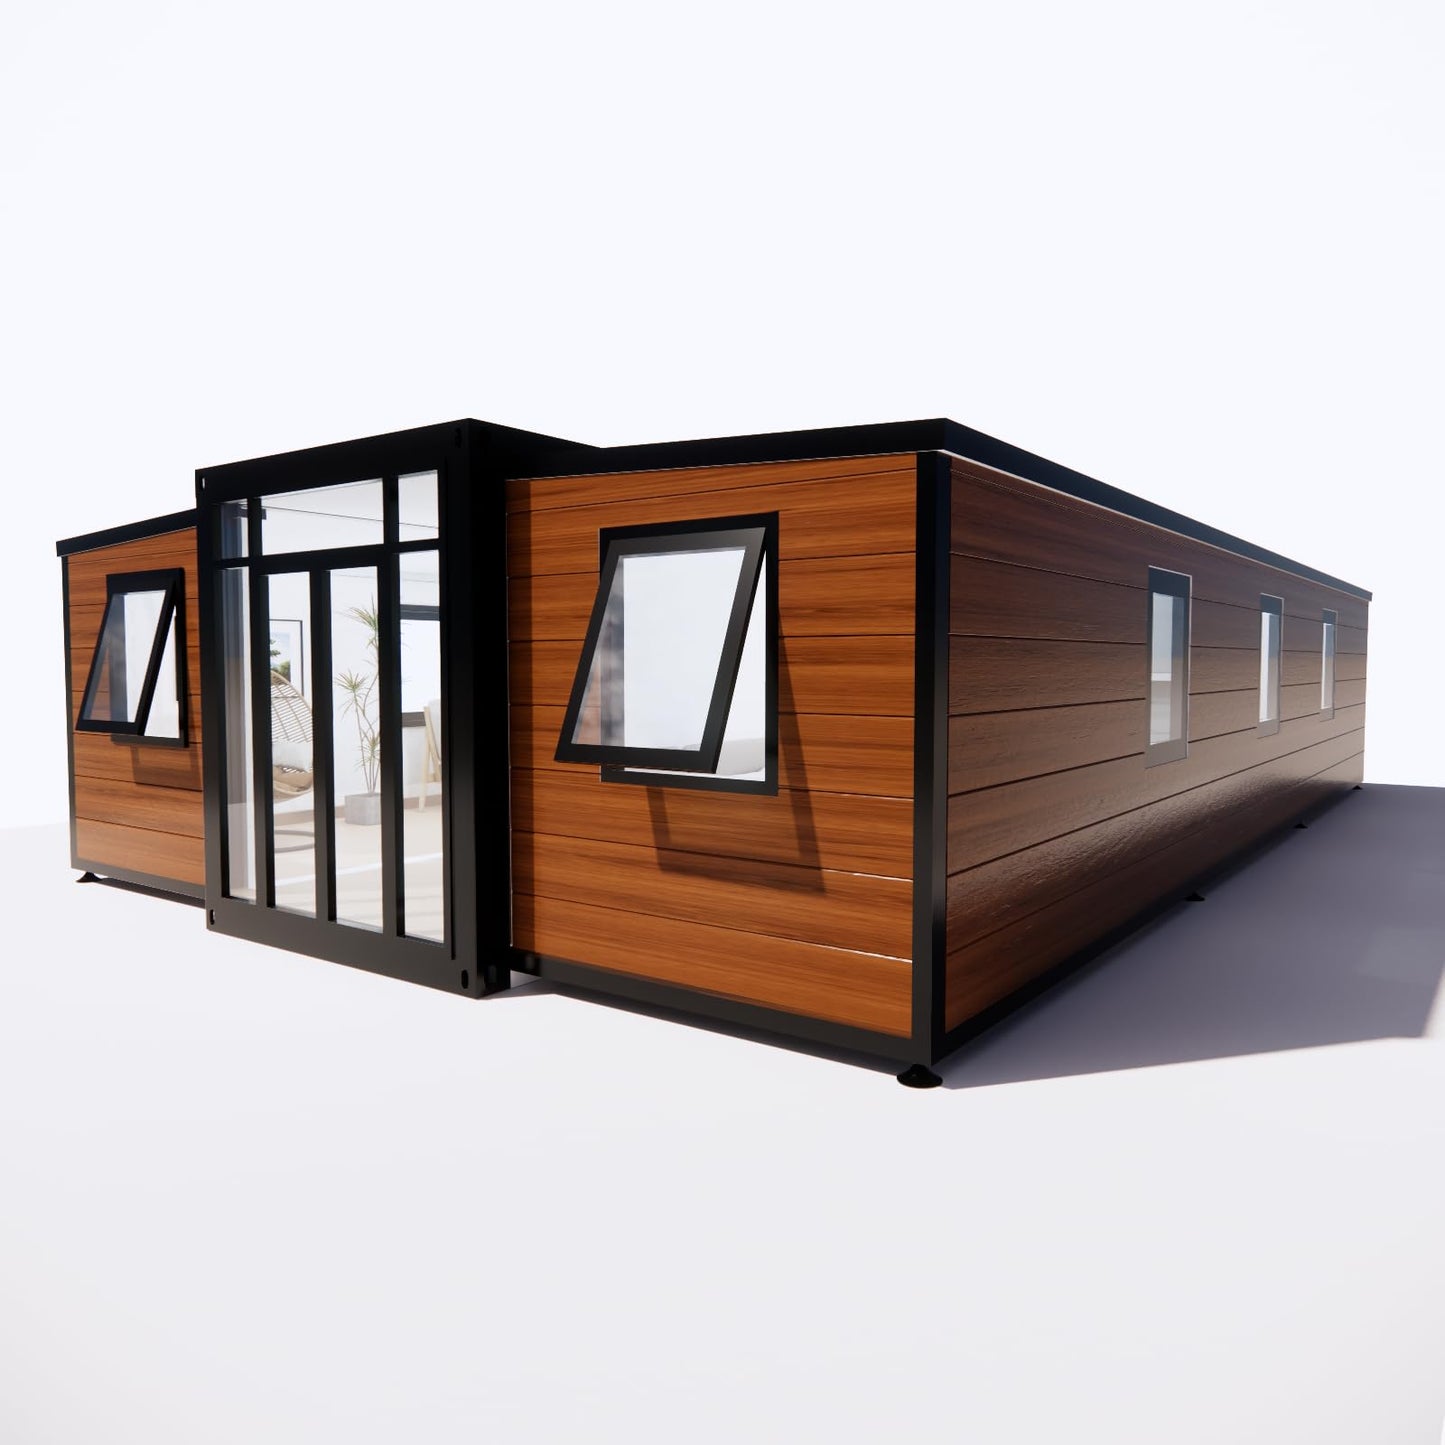 Feekercn 40FT Tiny House to Live in,Portable Prefab House with 3 Bedroom,1 Full Equiped Bathroom and Kitchen,Prefabricated Container House for Adults Living,Foldable Mobile Home with Steel Frame